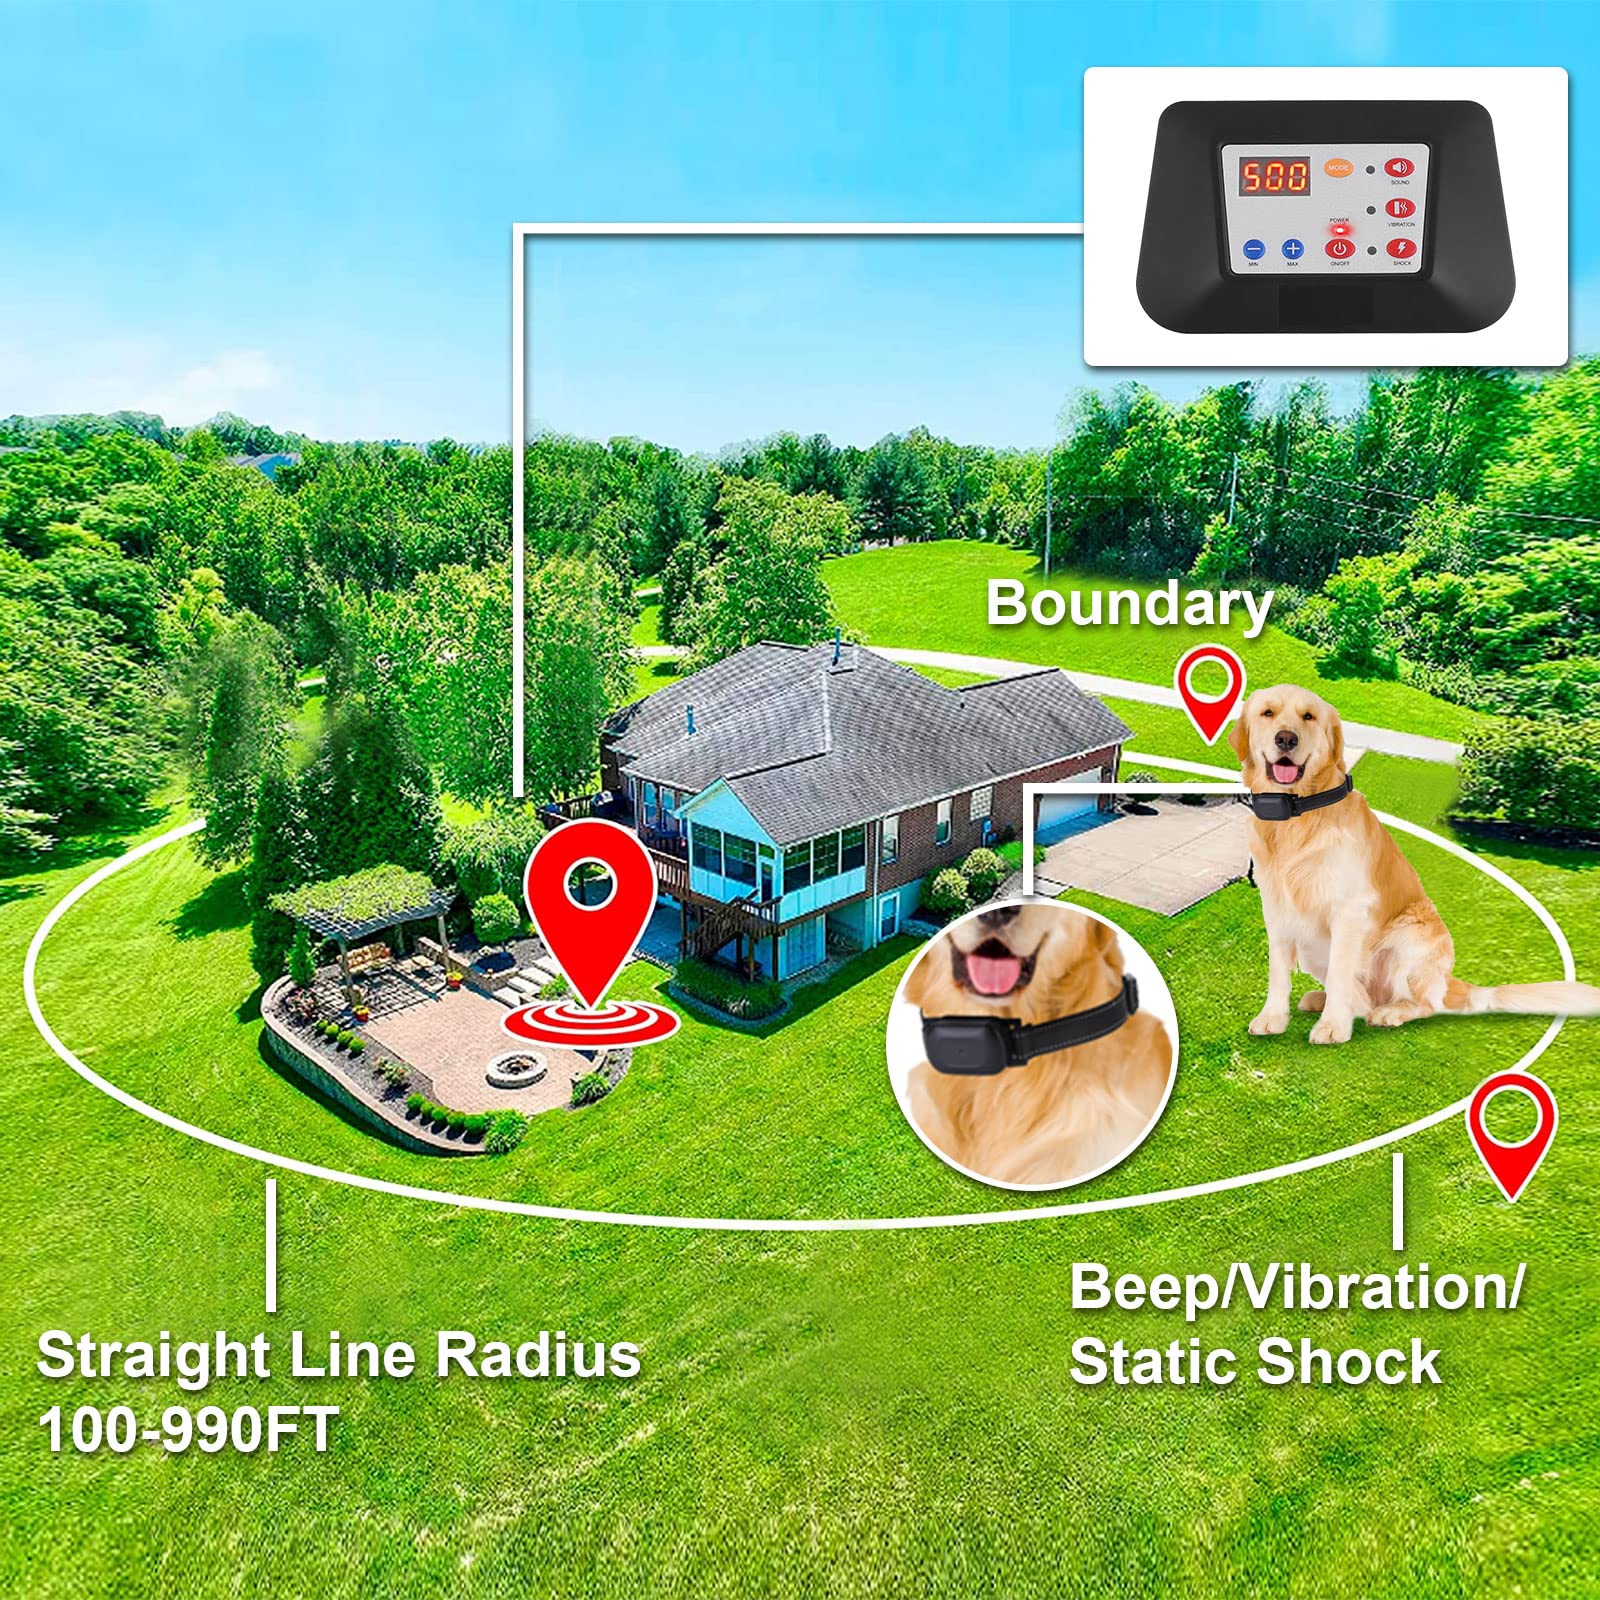 Moclever Wireless Dog Fence System Electric Dog Fence Training Collar with Remote 2 in 1, Dog Boundary Containment System Range 990ft, IPX6 Waterproof & Rechargeable,for Small Medium Large Dogs